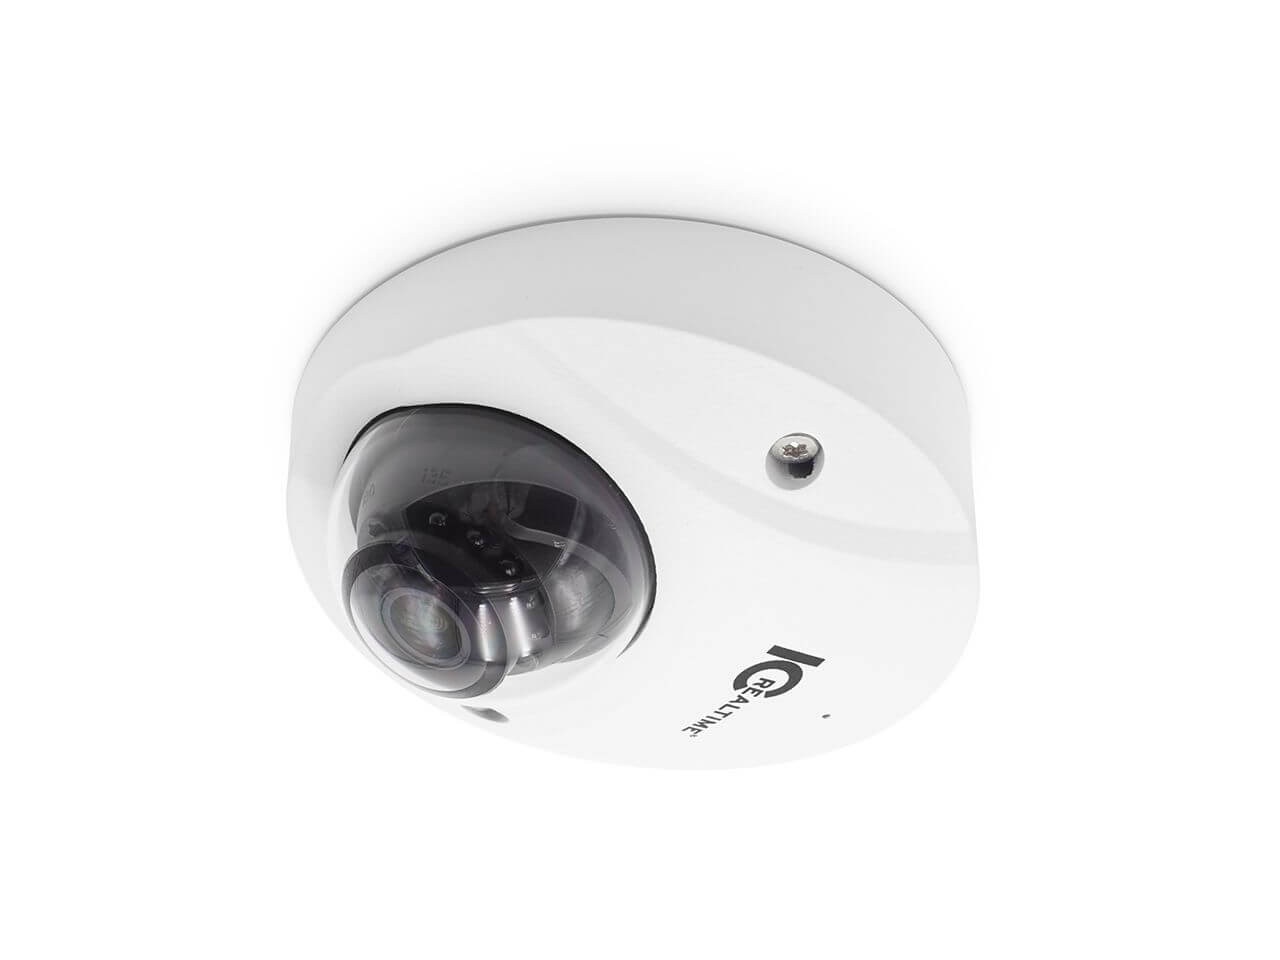 IPMX-W40F-IRW2 4MP IP Indoor/Outdoor Small Size Vandal Dome Camera/164ft IR/PoE Capable/AI by ICRealtime